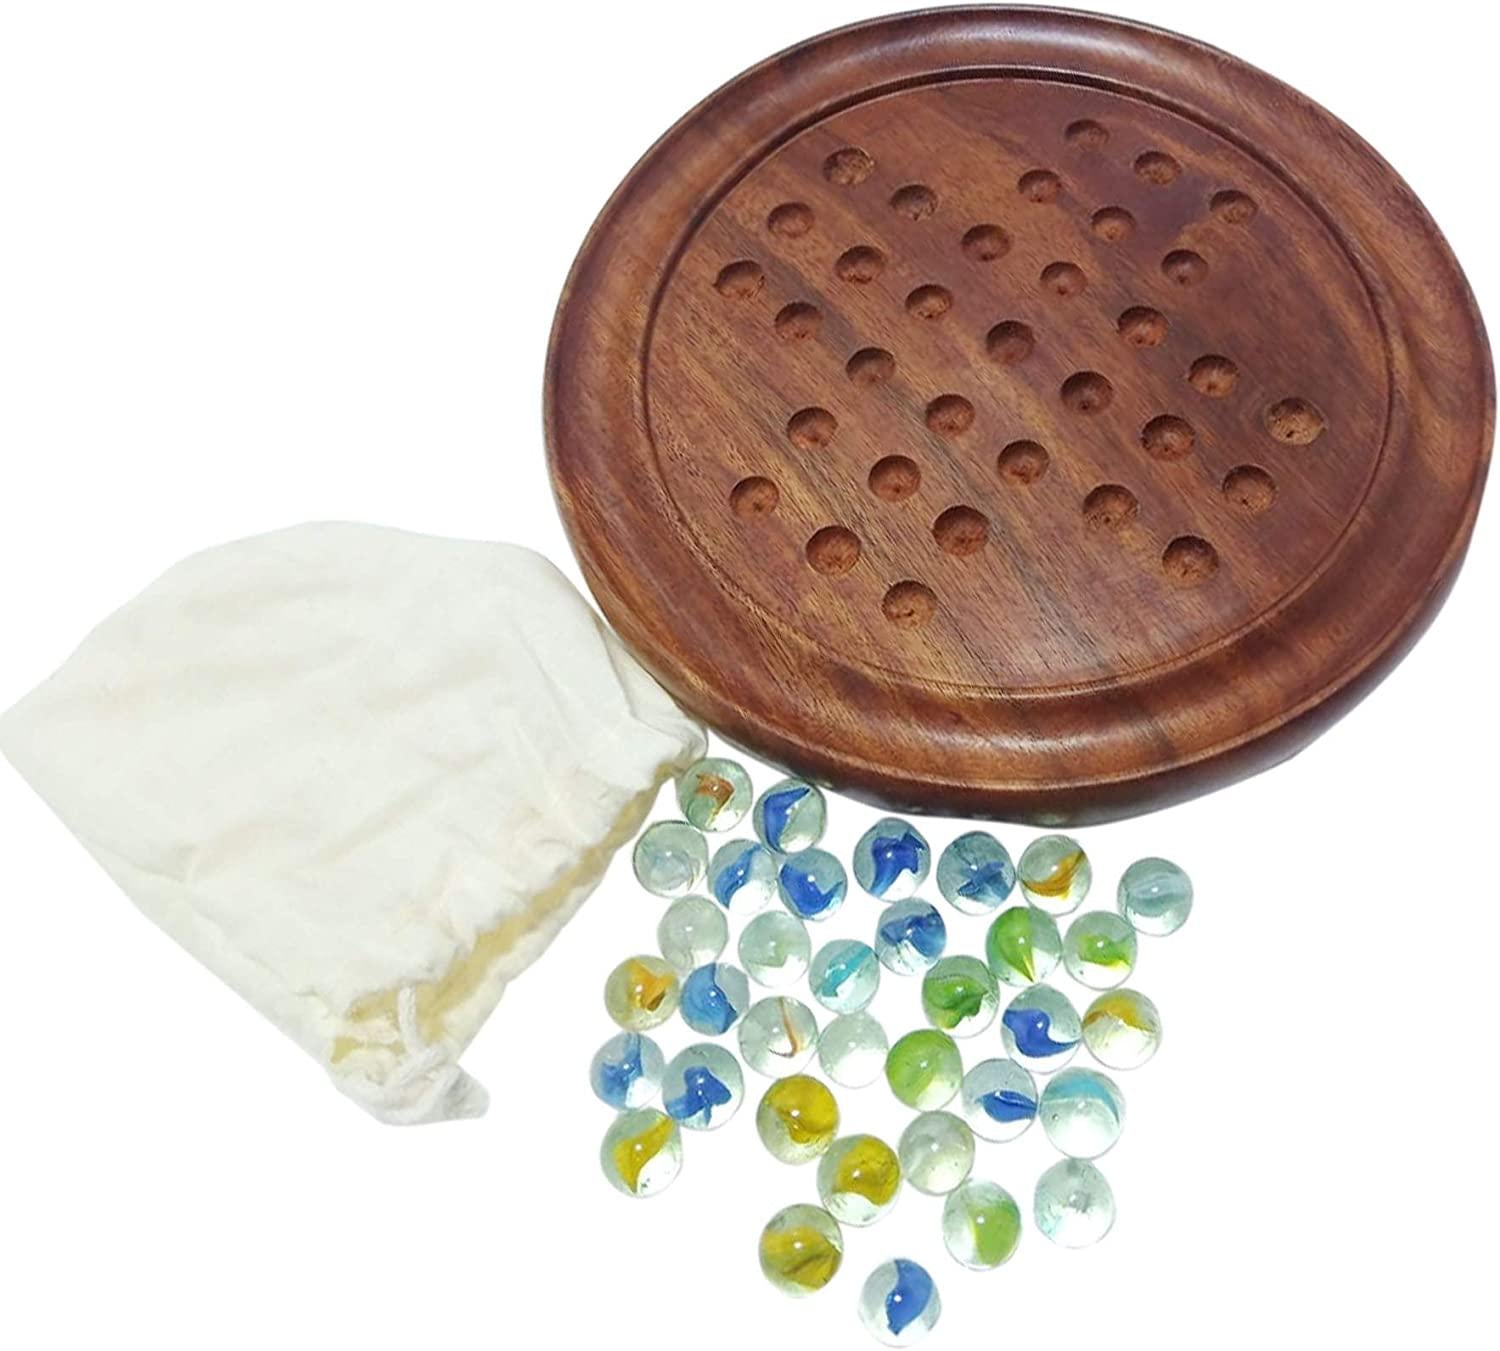 Metallic India, Games Solitaire Board in Wood with Glass Marbles